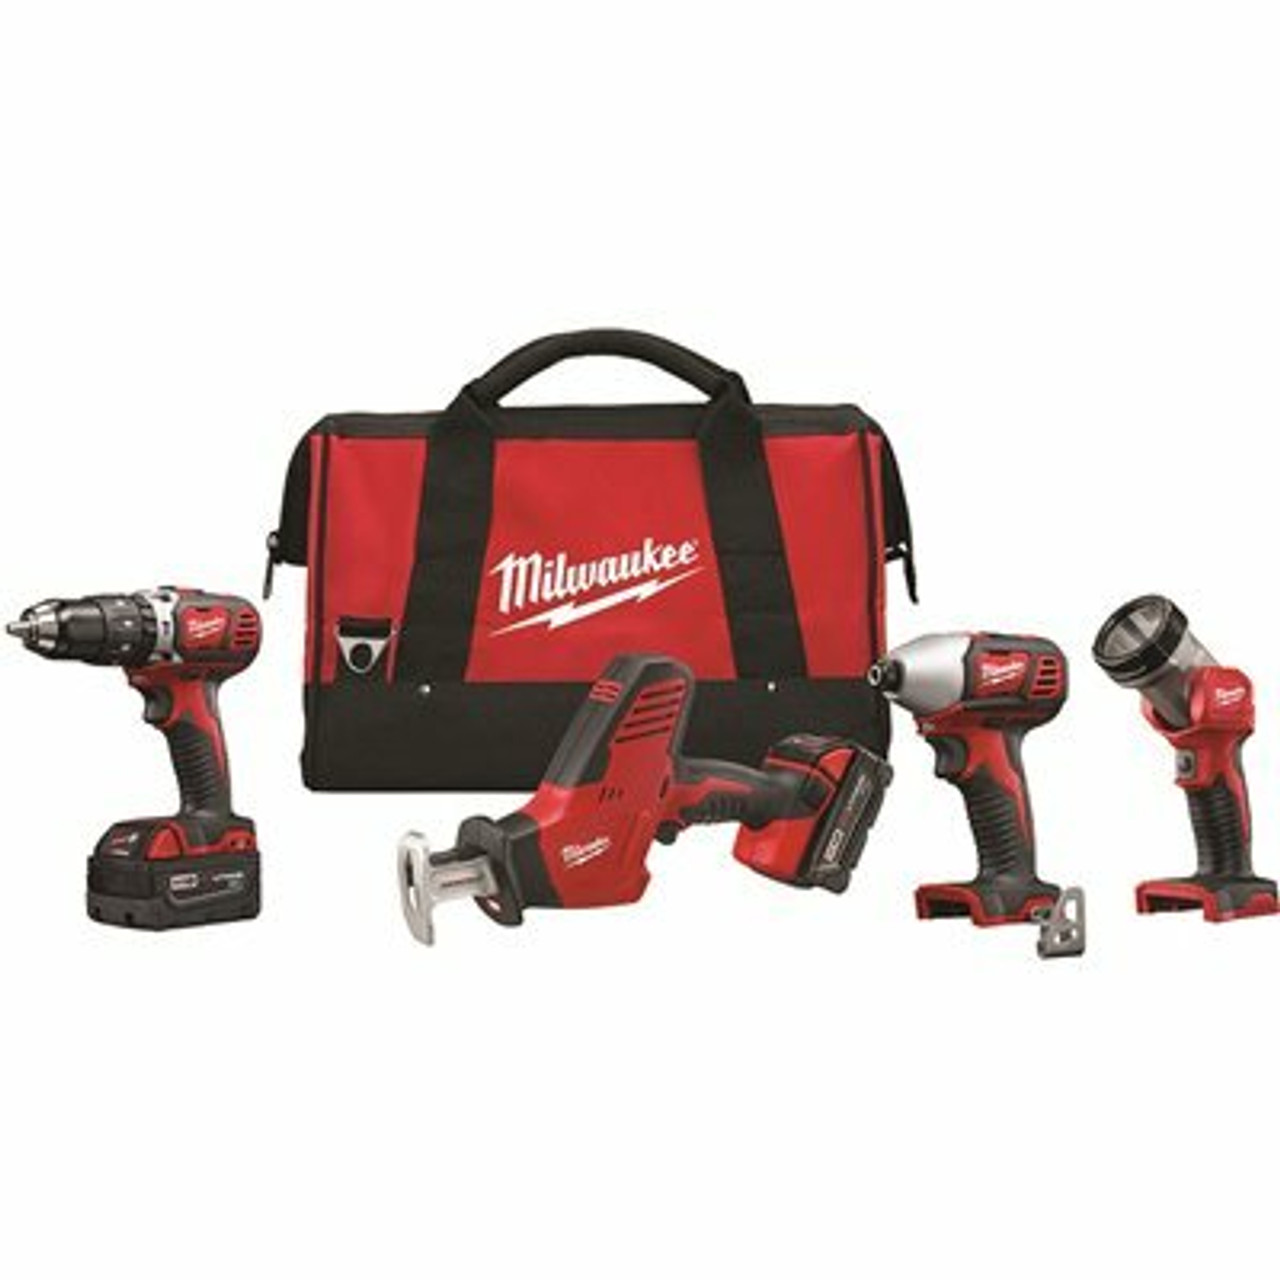 Milwaukee M18 18-Volt Lithium-Ion Cordless Combo Tool Kit (4-Tool) W/(2) 3.0Ah Batteries, (1) Charger, (1) Tool Bag